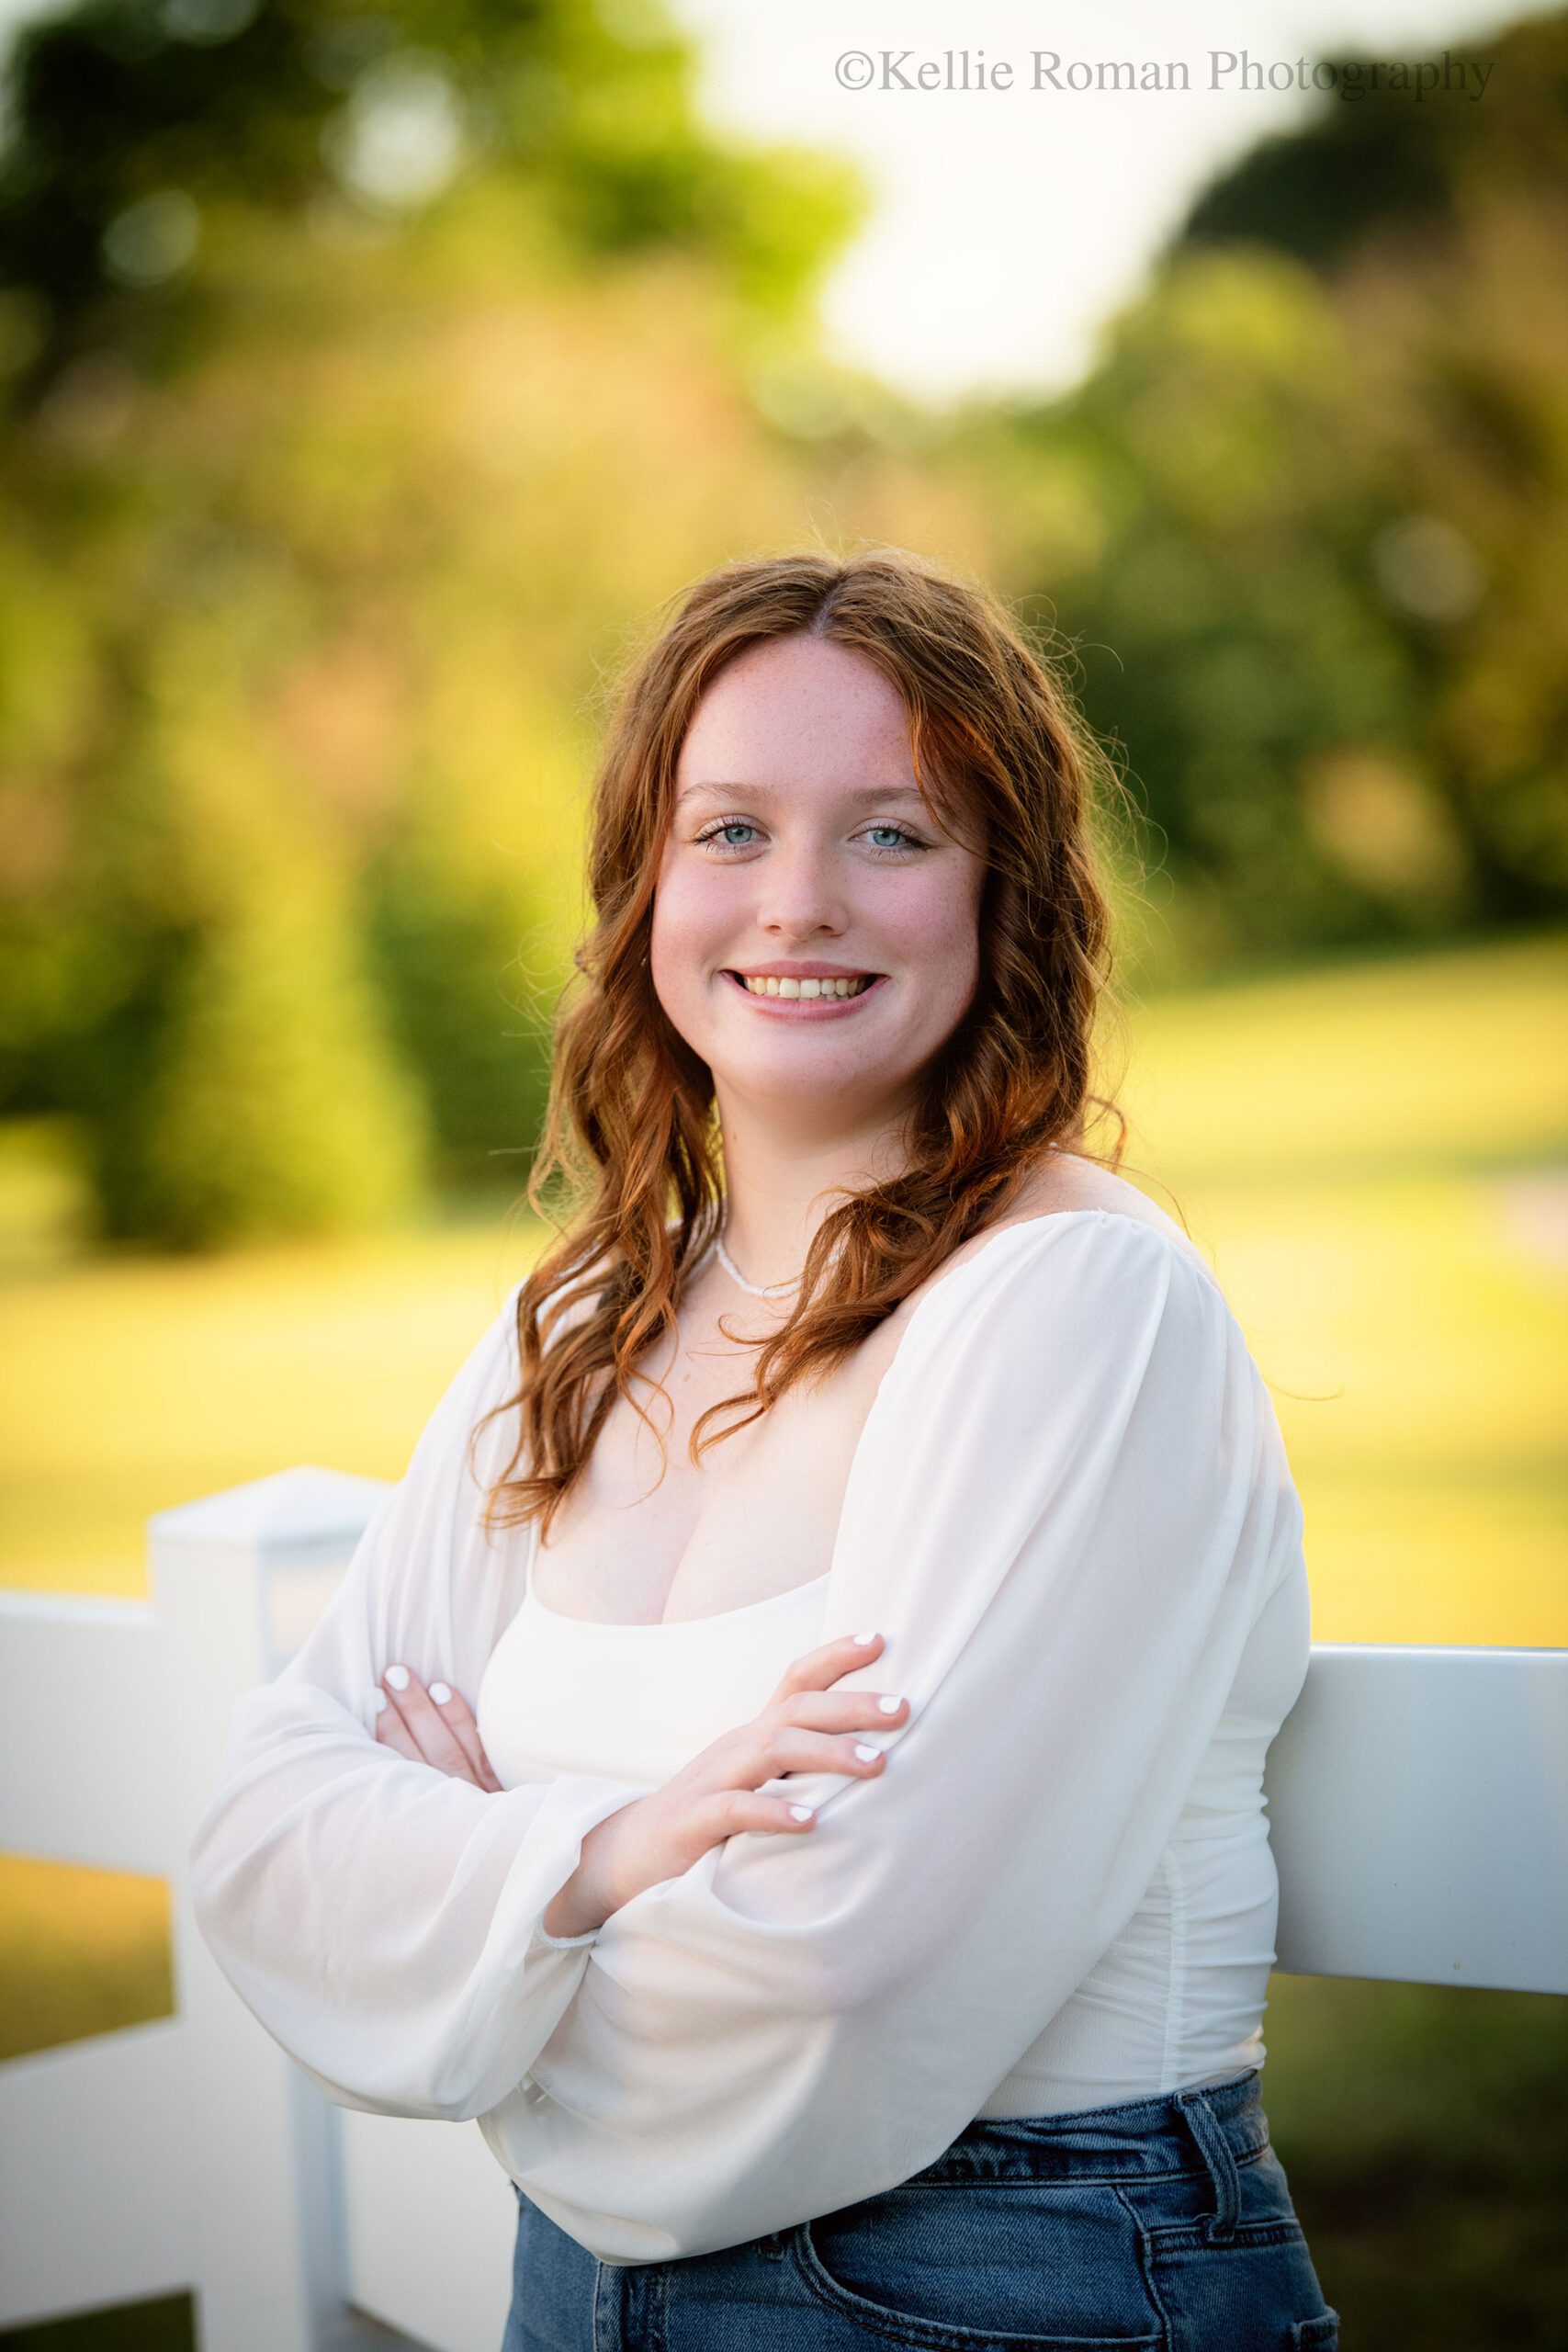 oak creek senior photography. high school senior girl is in a racine park leaning against a white fence. she has on a jeans and a white flowing top. she has her arms crossed and is smiling. she has long red curly hair. 
